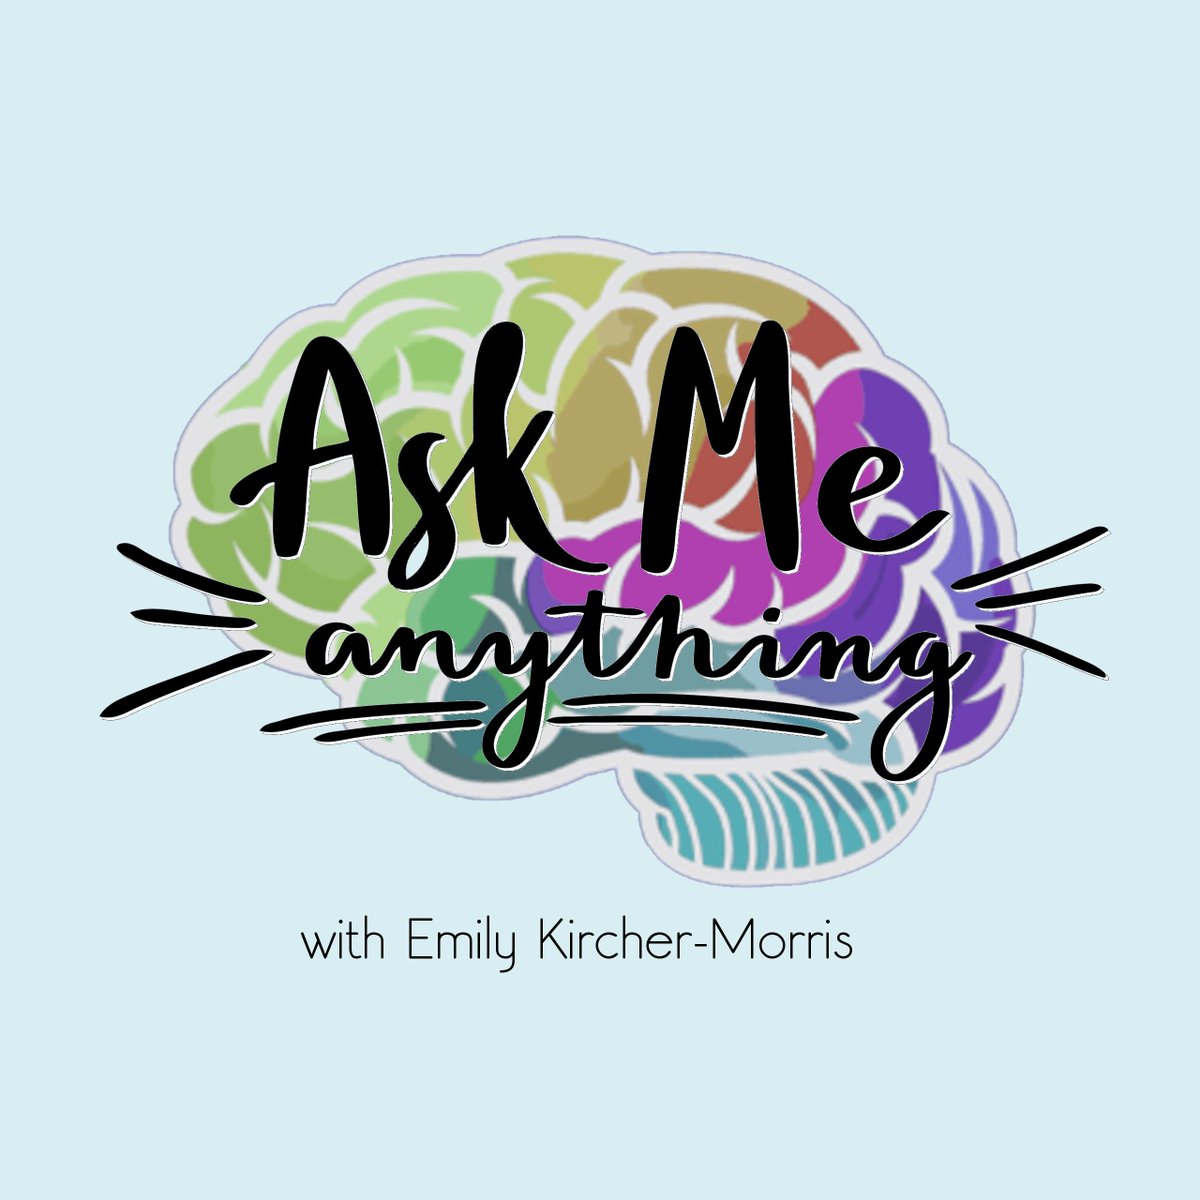 Have a question for Emily regarding neurodiversity, twice-exceptionality, or another related topic? Join our Facebook group and submit your questions for the opportunity to have Emily answer them. Visit buff.ly/4c5H6kH to join! #neurodiversitypodcast #AMA #askmeanything